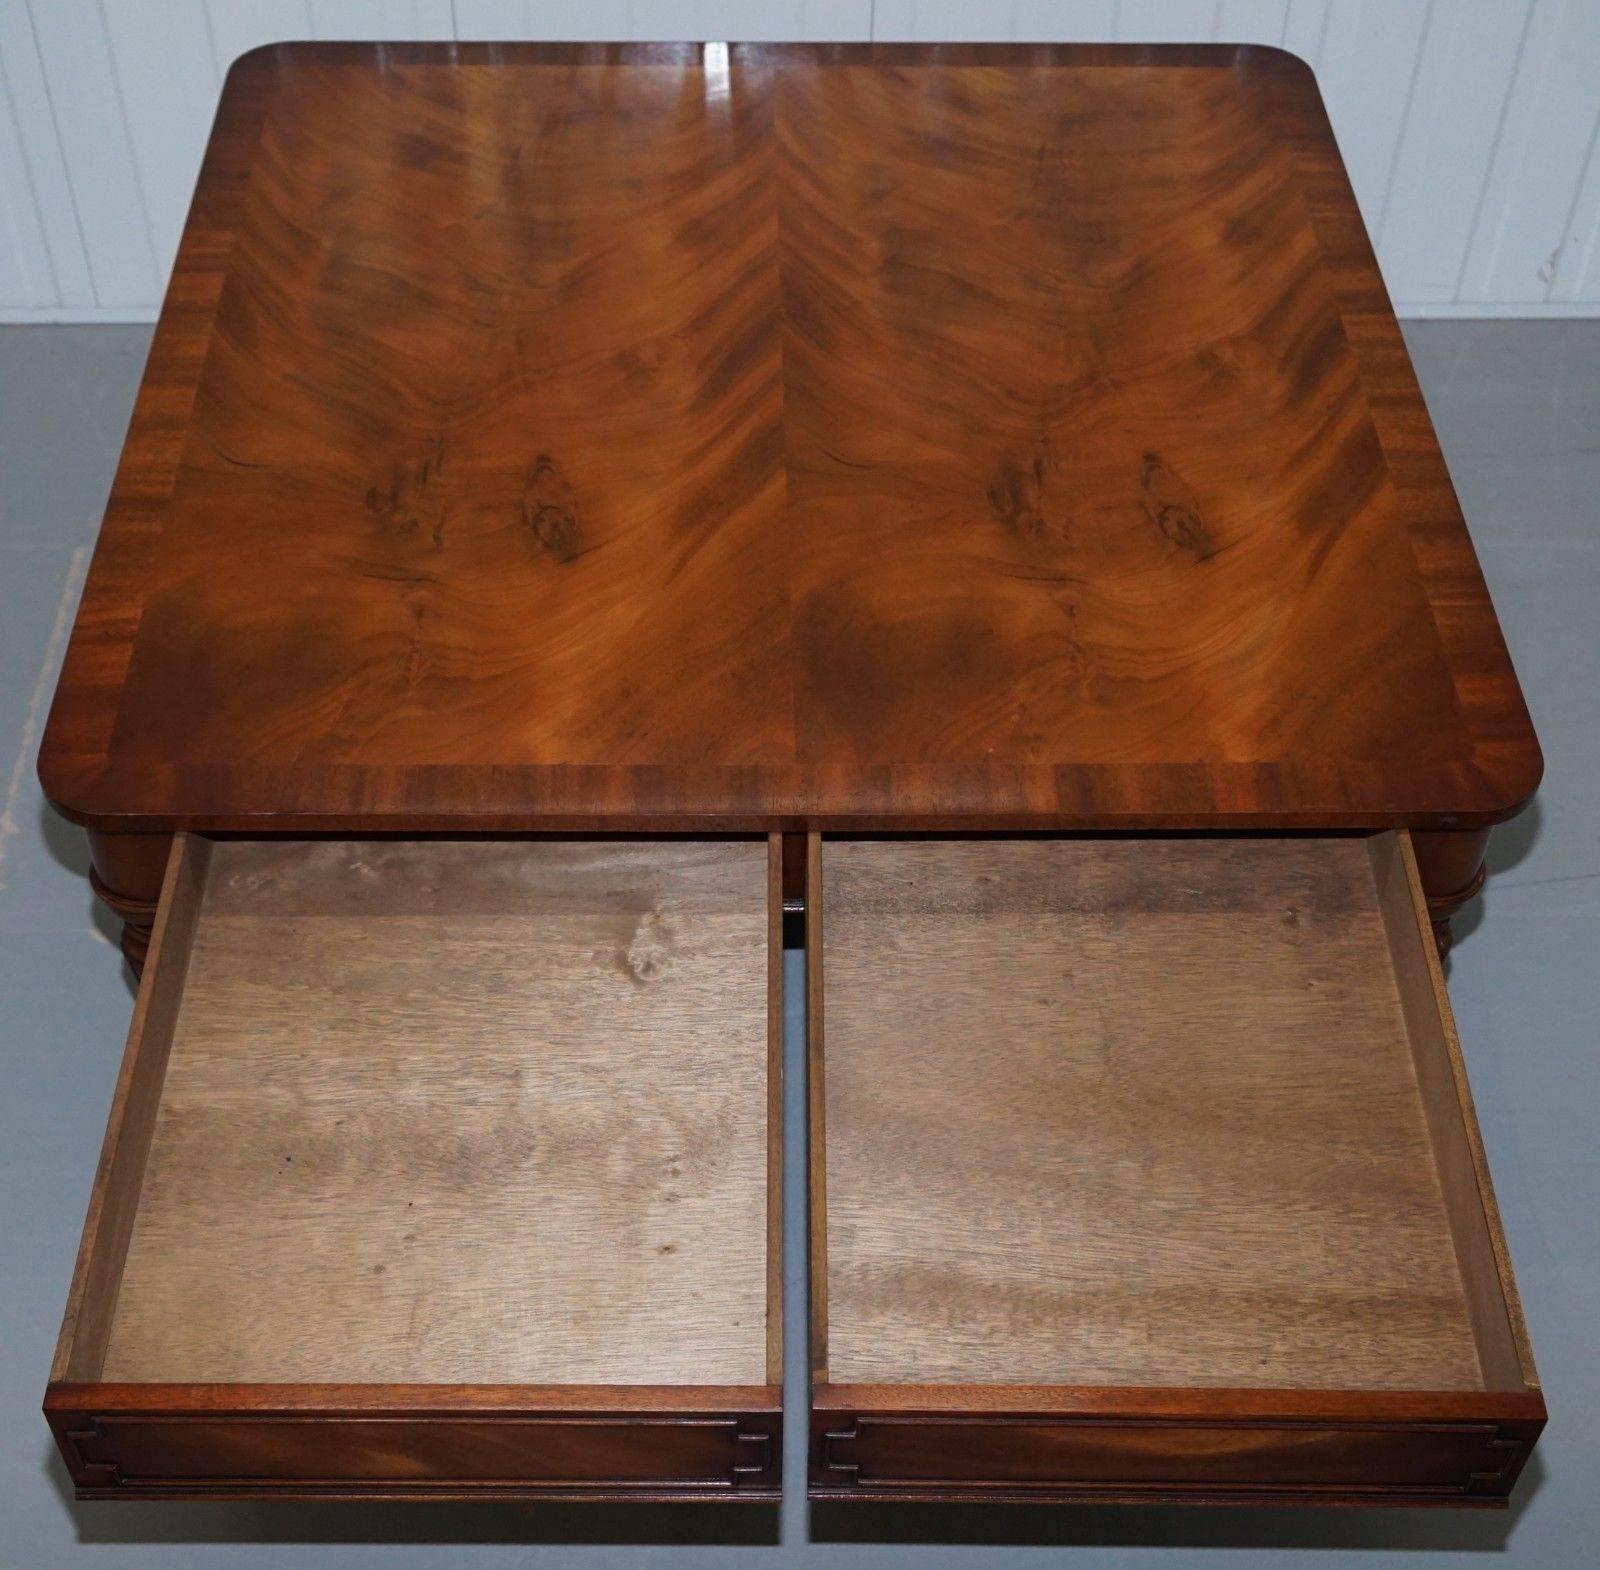 20th Century Square Flamed Mahogany Coffee Table Carbed Legs Castors with Drawers